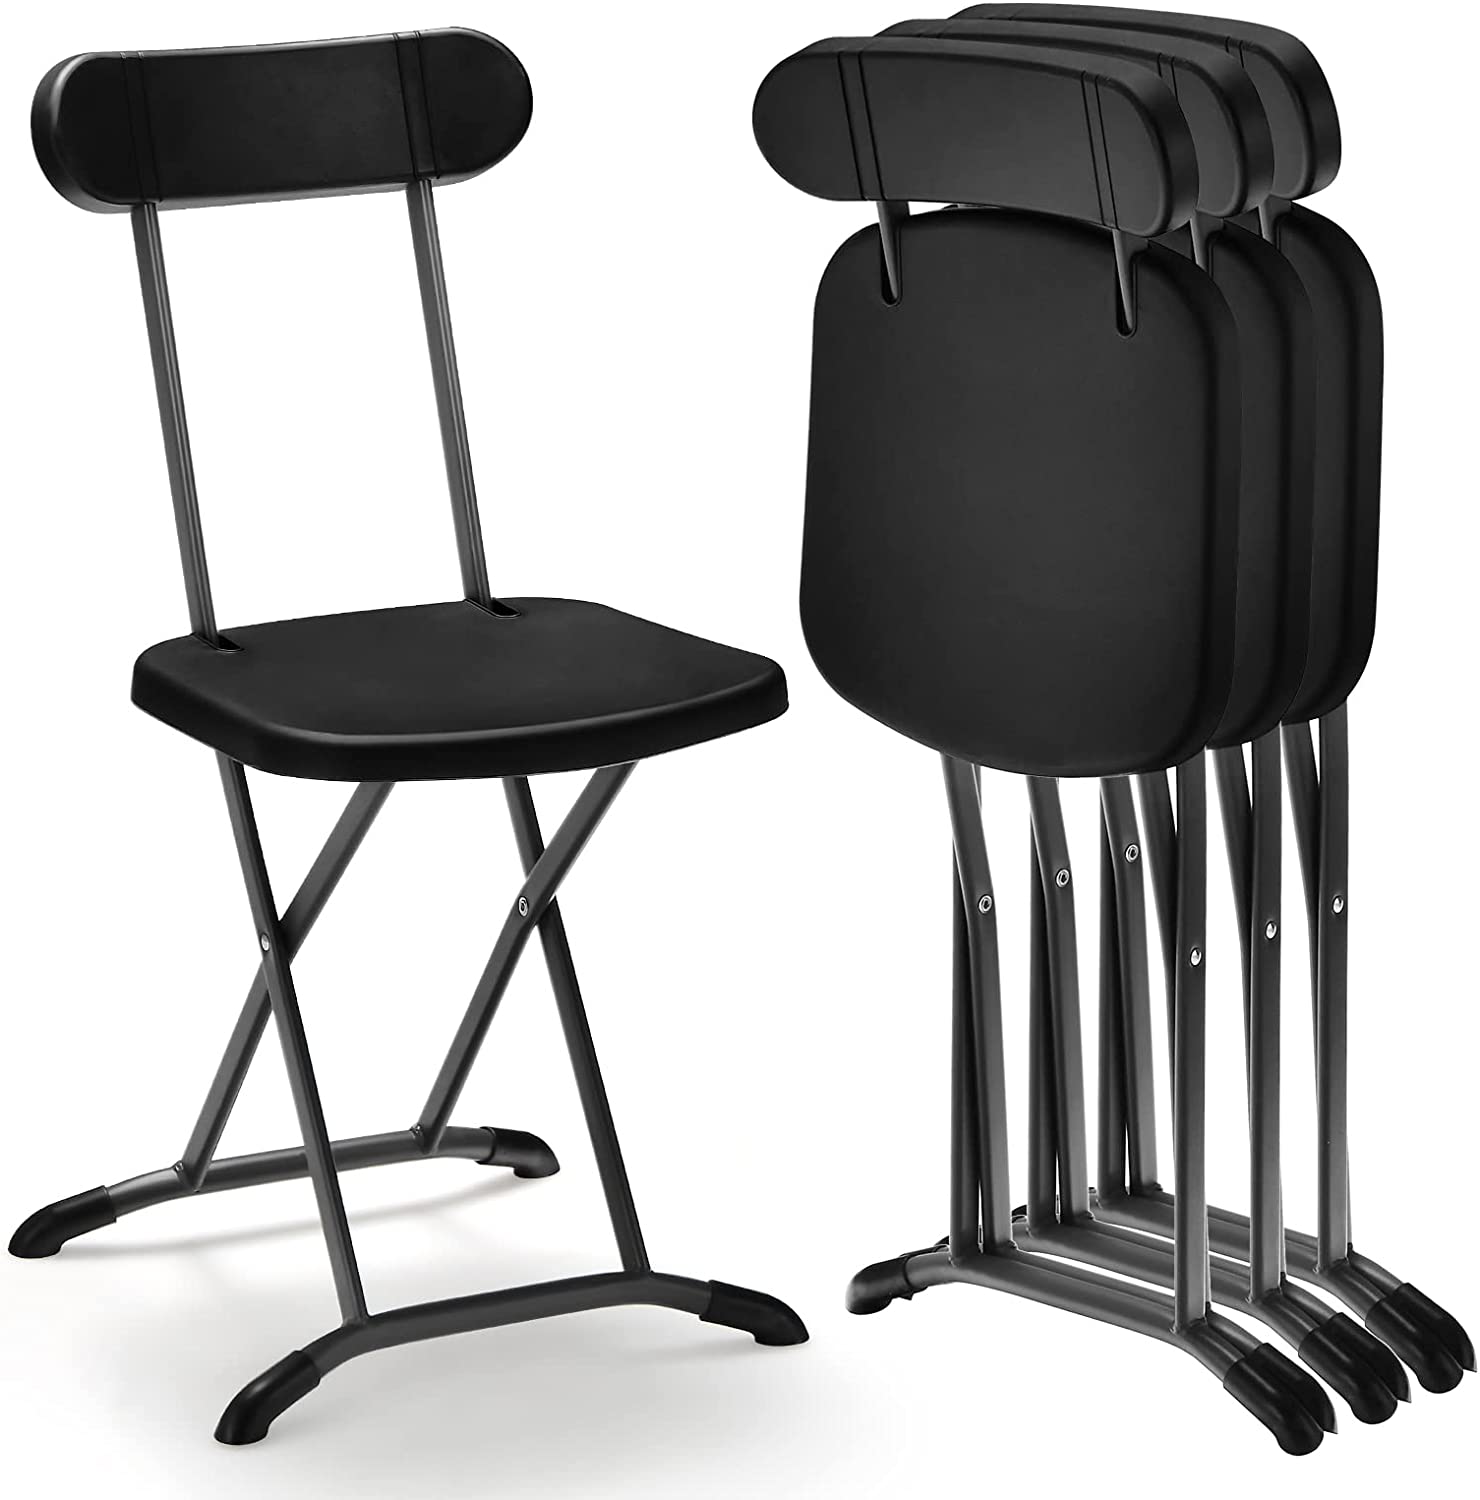 Giantex 2-Pack Folding Chairs, Plastic Event Chairs, Lightweight Foldable Chairs with Solid X-Shape Frame